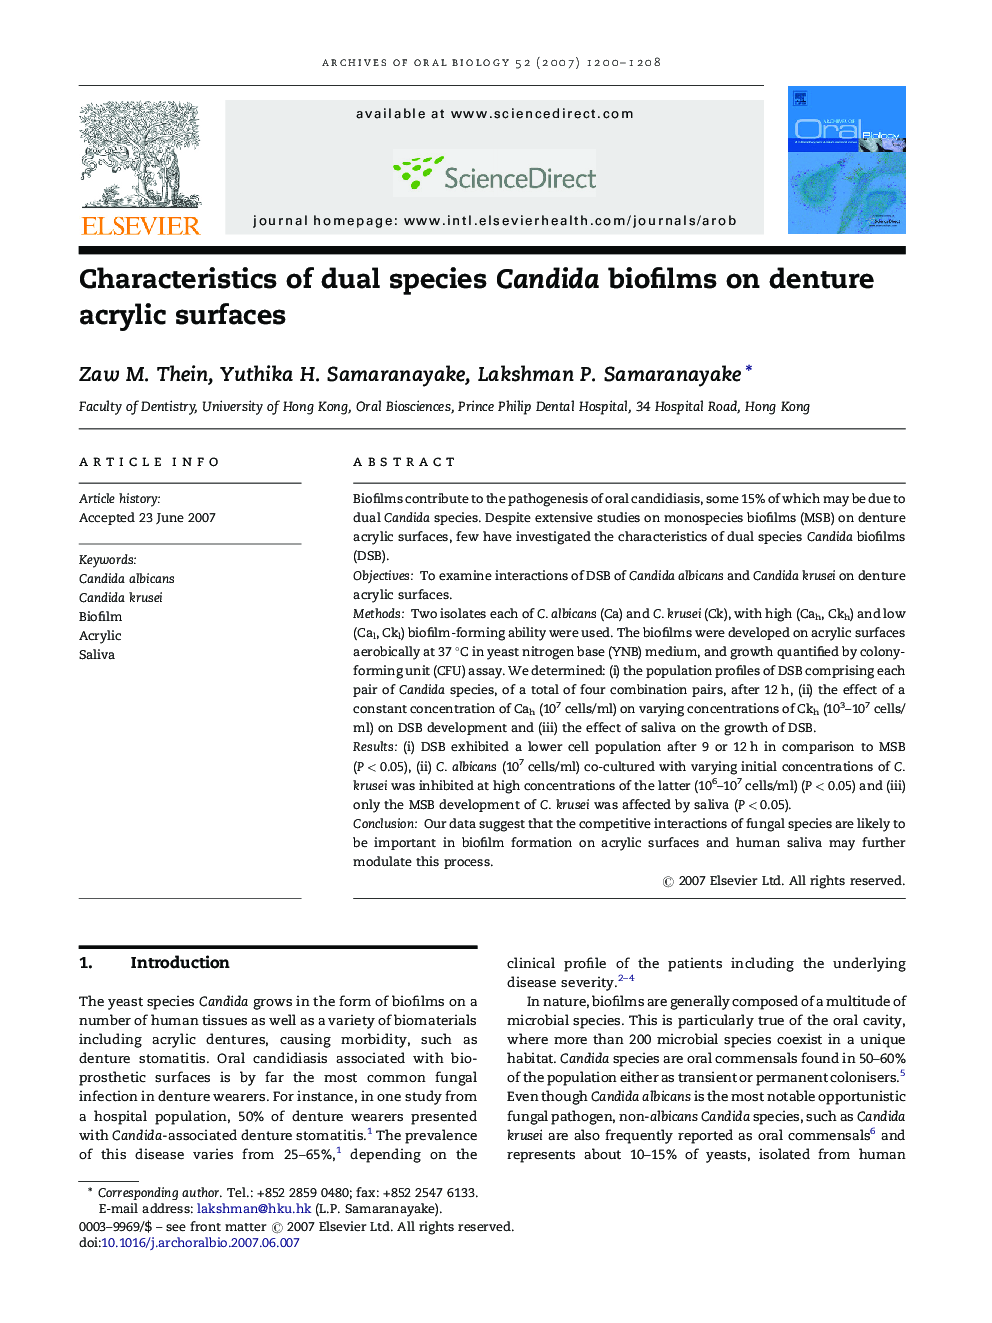 Characteristics of dual species Candida biofilms on denture acrylic surfaces